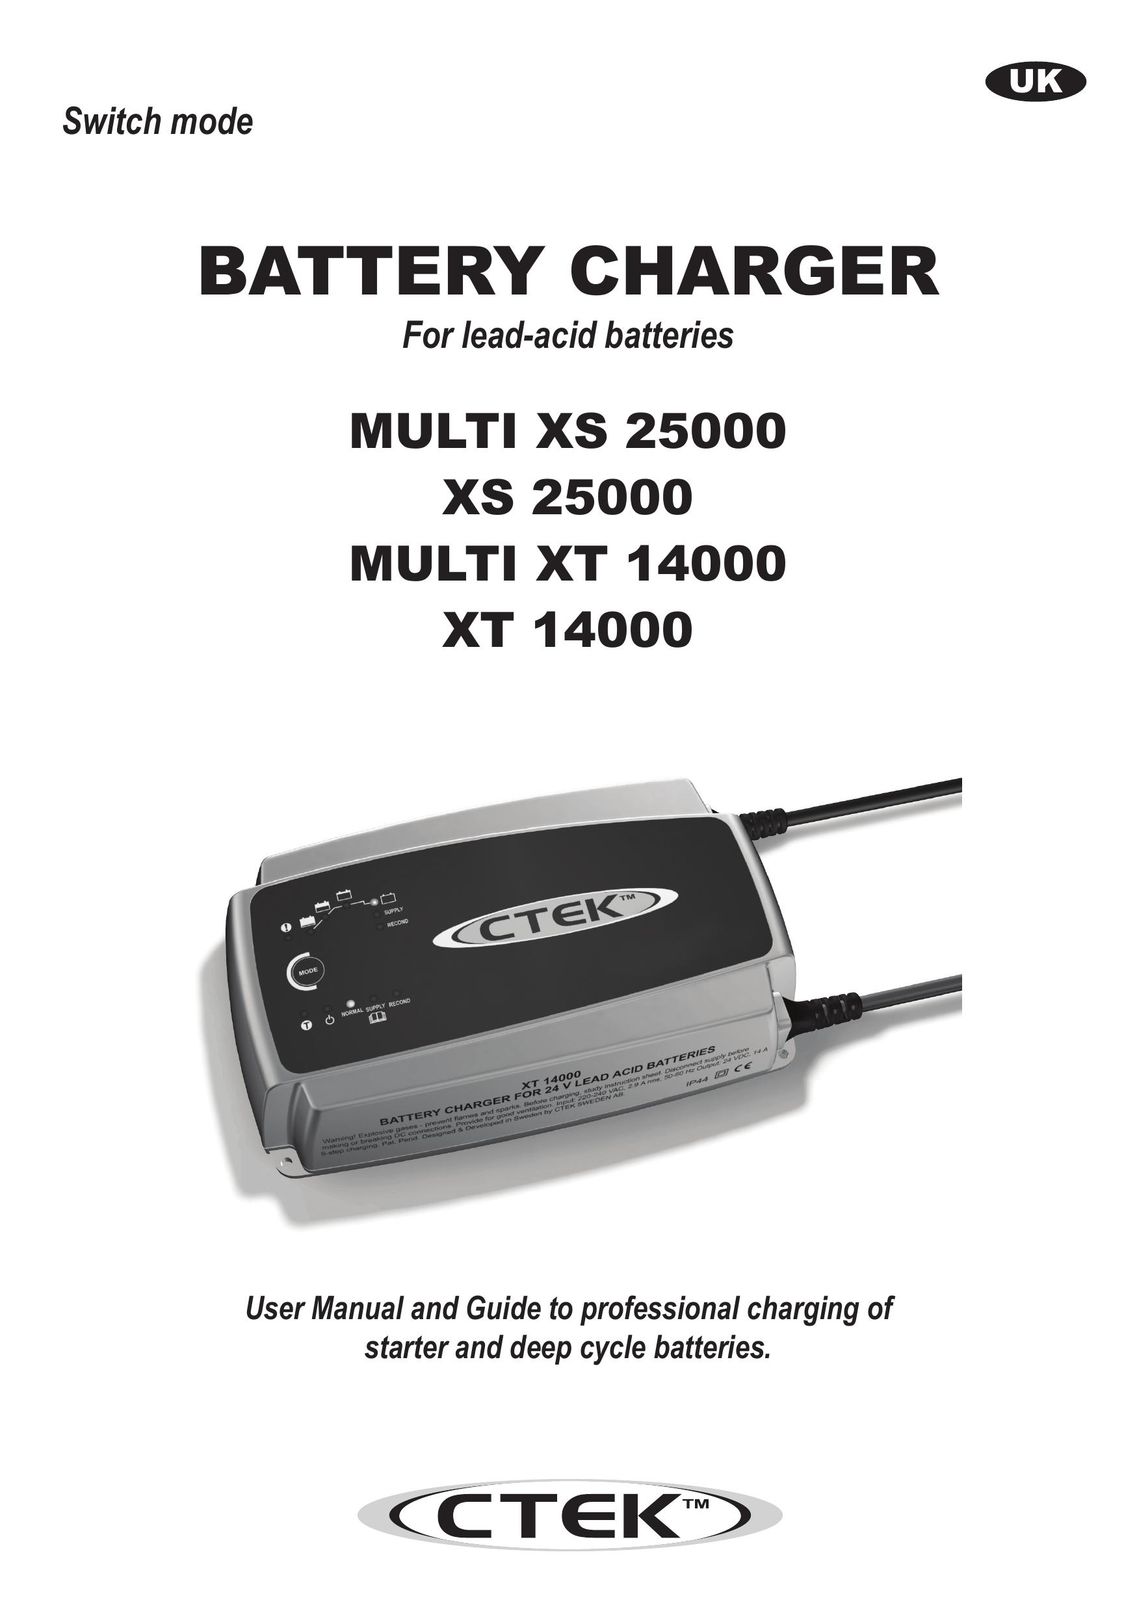 AB Soft XT 14000 Battery Charger User Manual